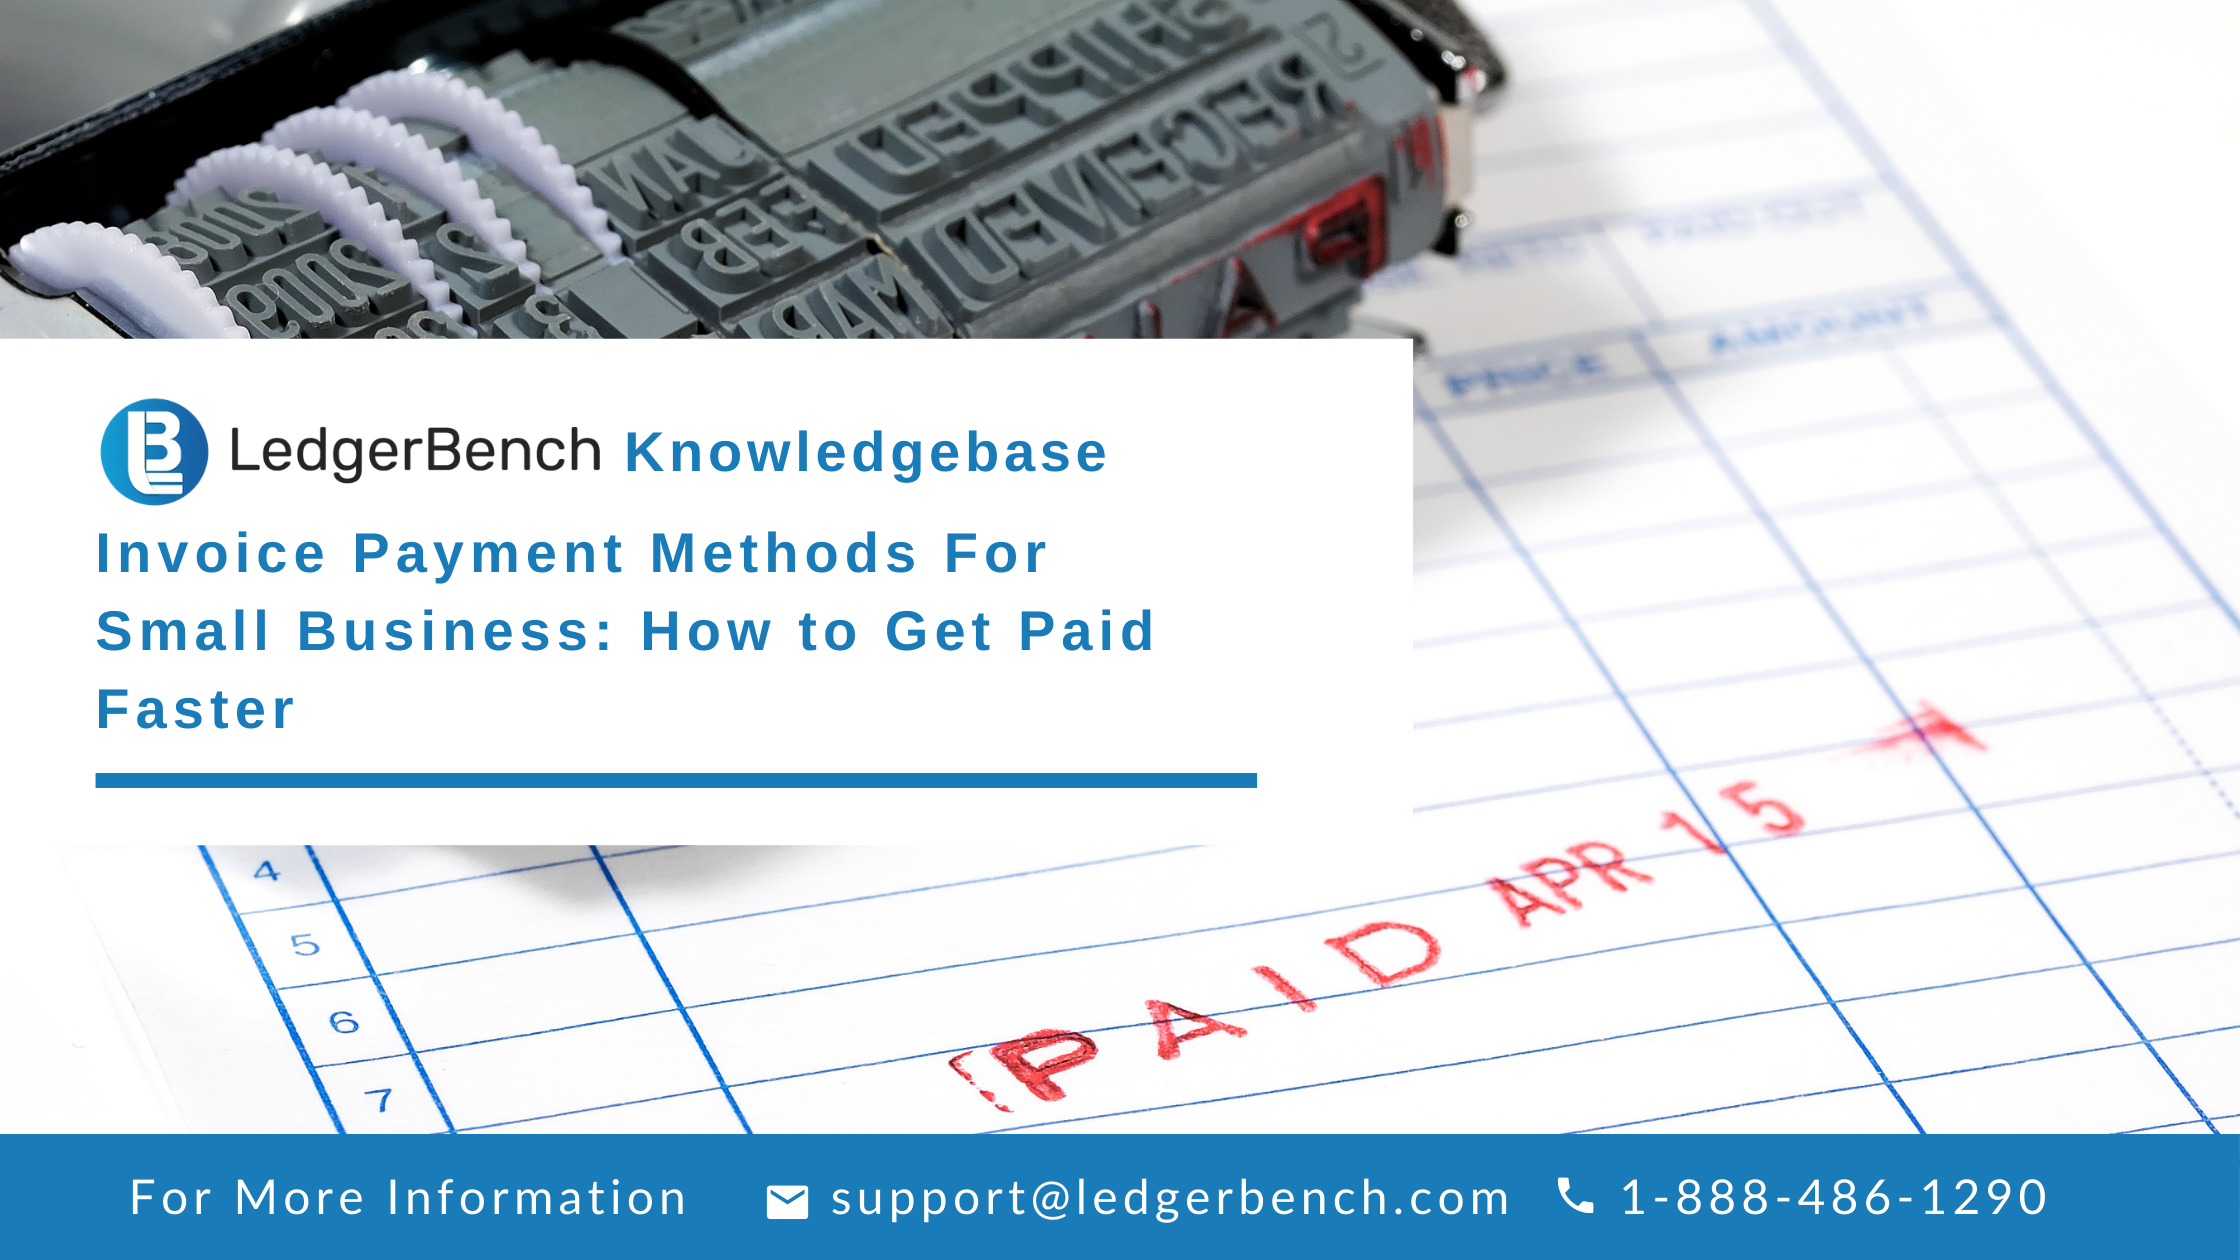 Invoice Payment Methods For Small Business: How to Get Paid Faster